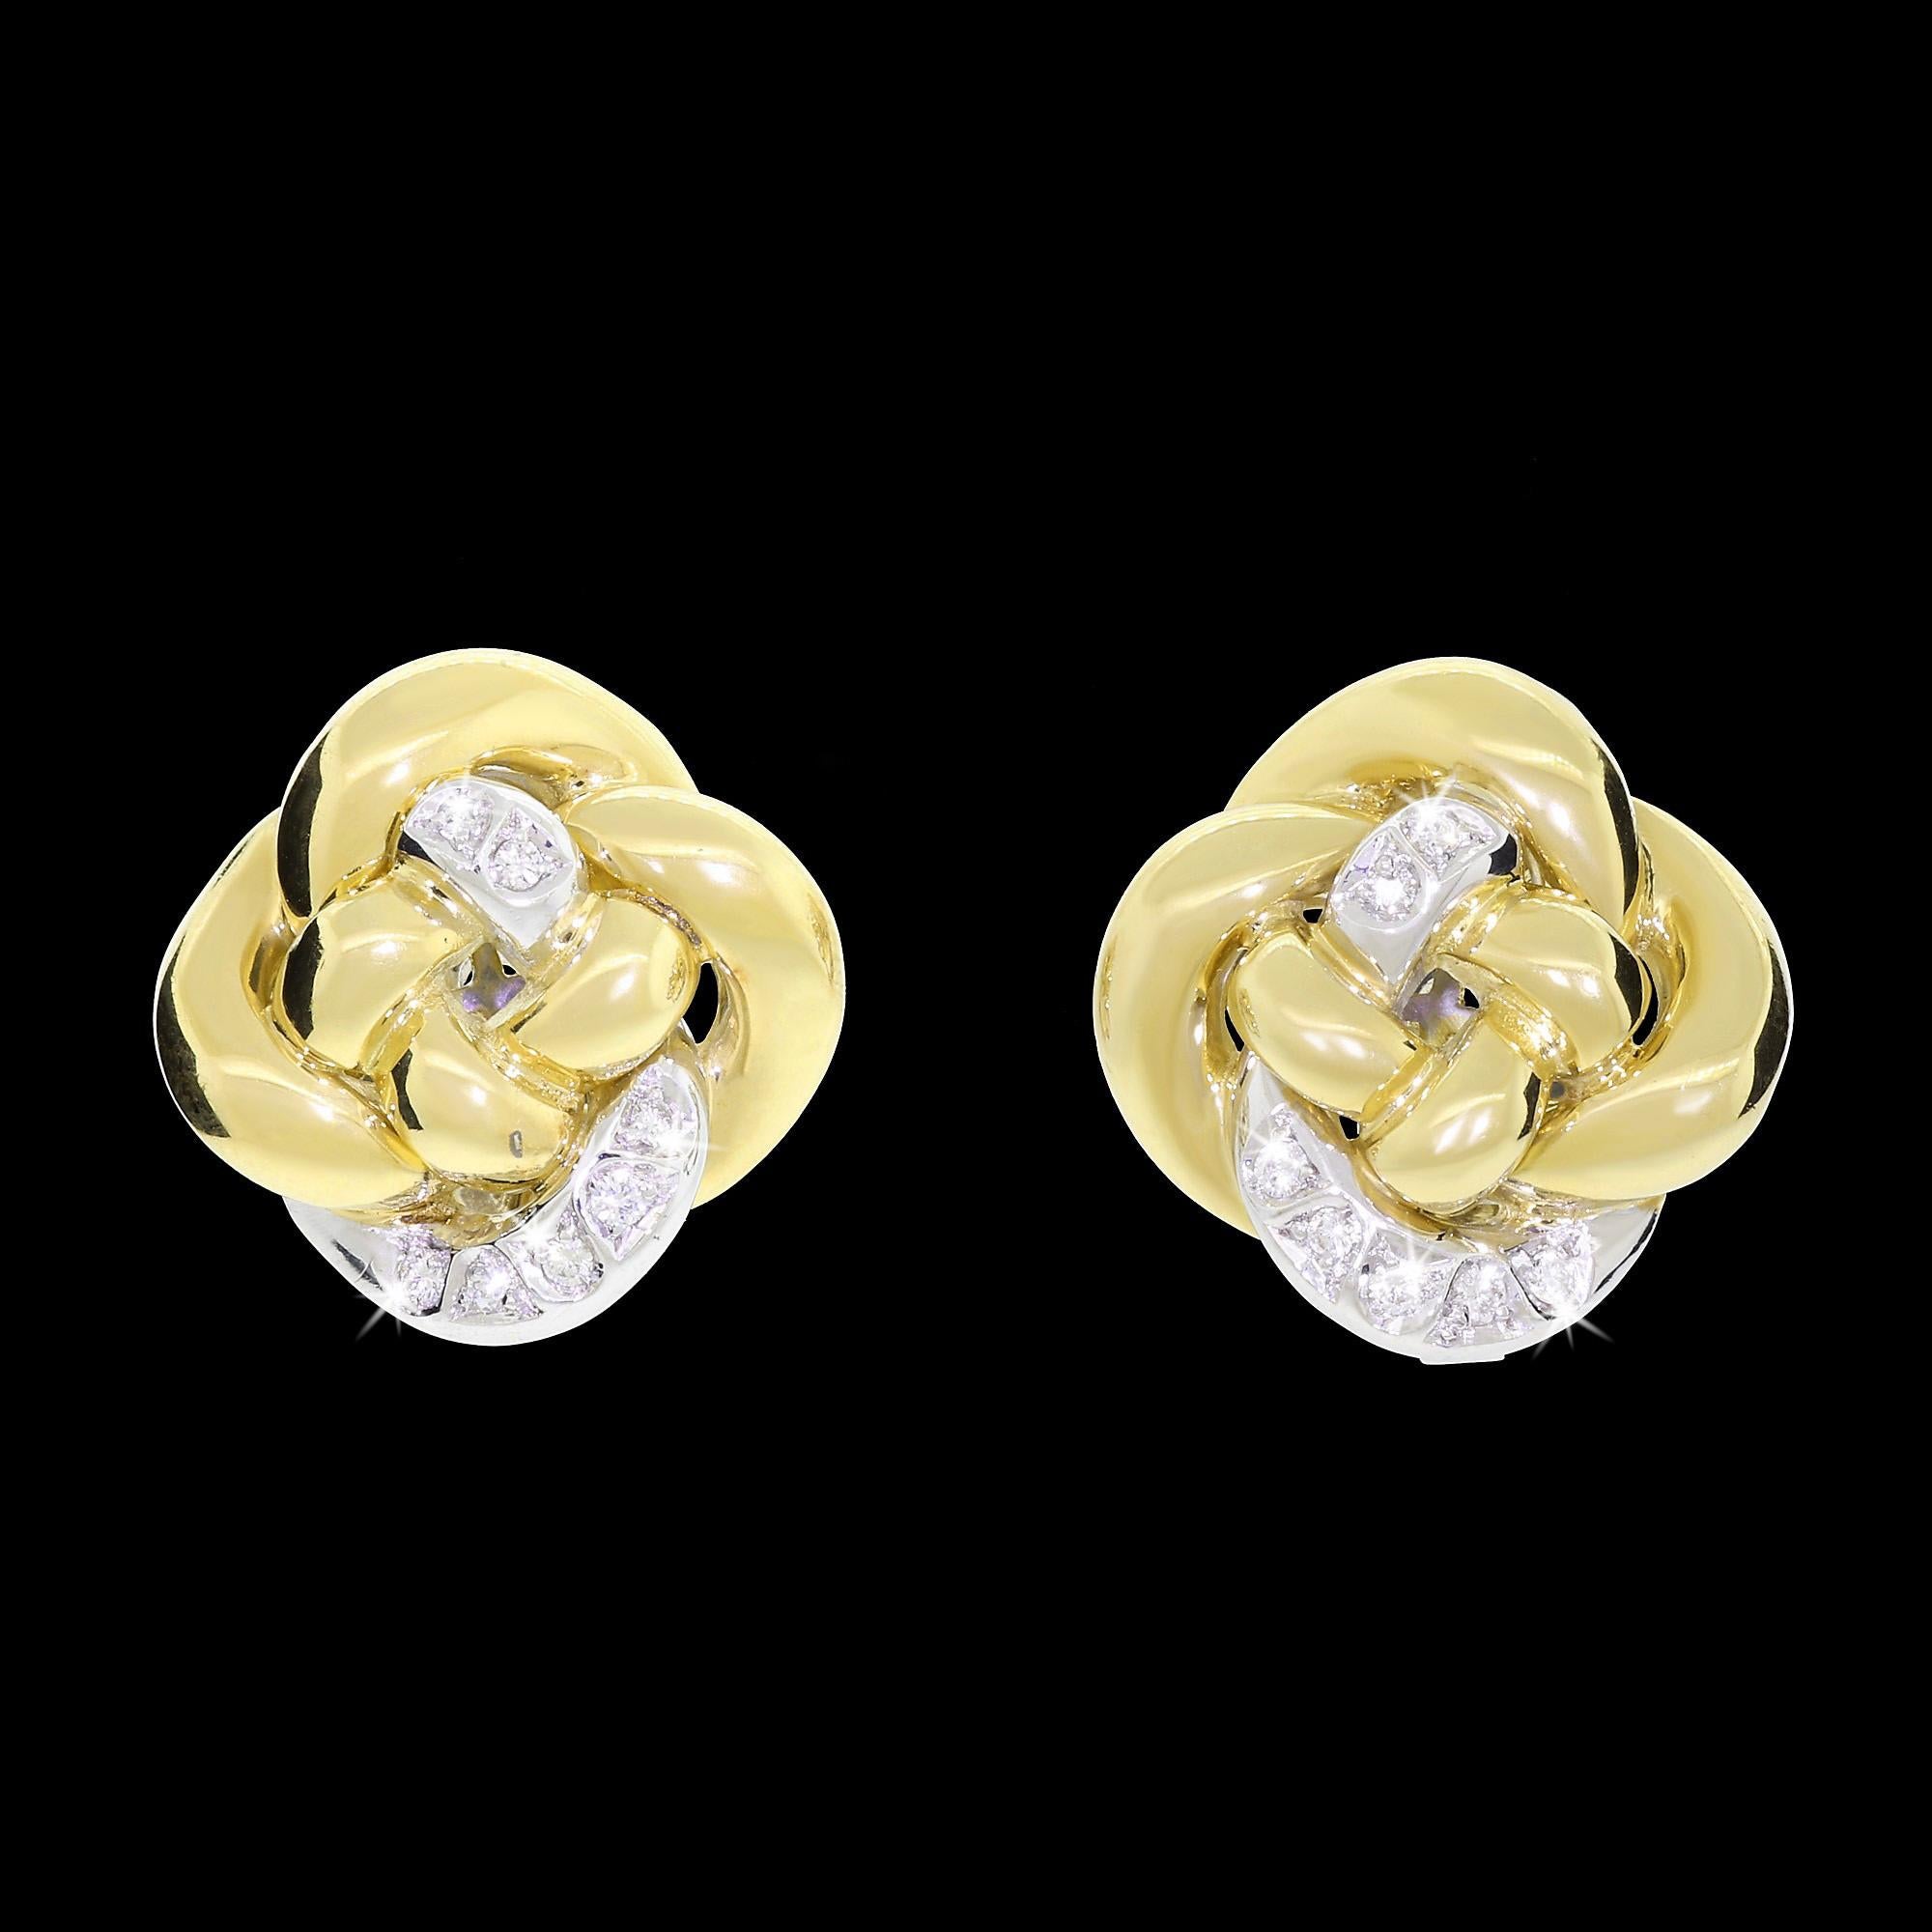 Couture 18 Karat Yellow Gold Diamond Nino Verita Love Knot Earrings 21.1 Grams In Excellent Condition For Sale In Lauderdale by the Sea, FL